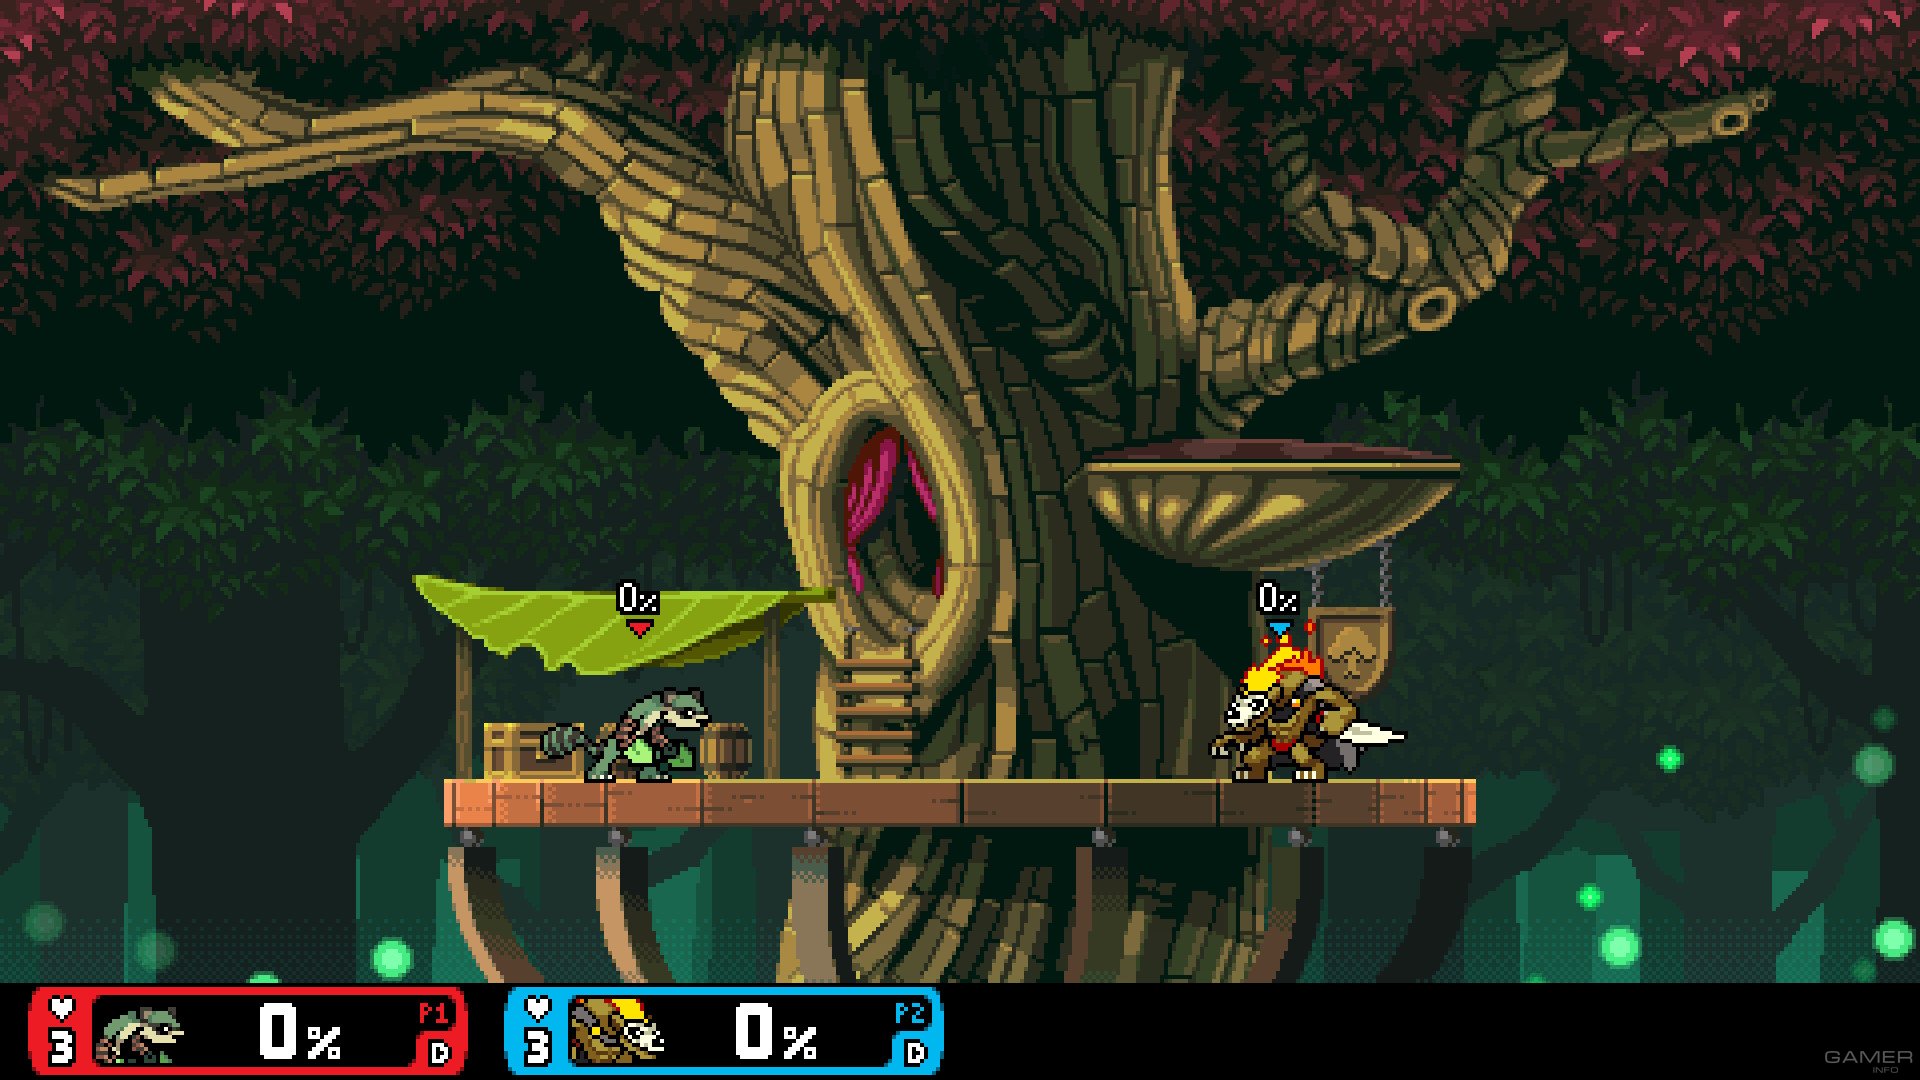 rivals of aether v1 5.2 free download pc